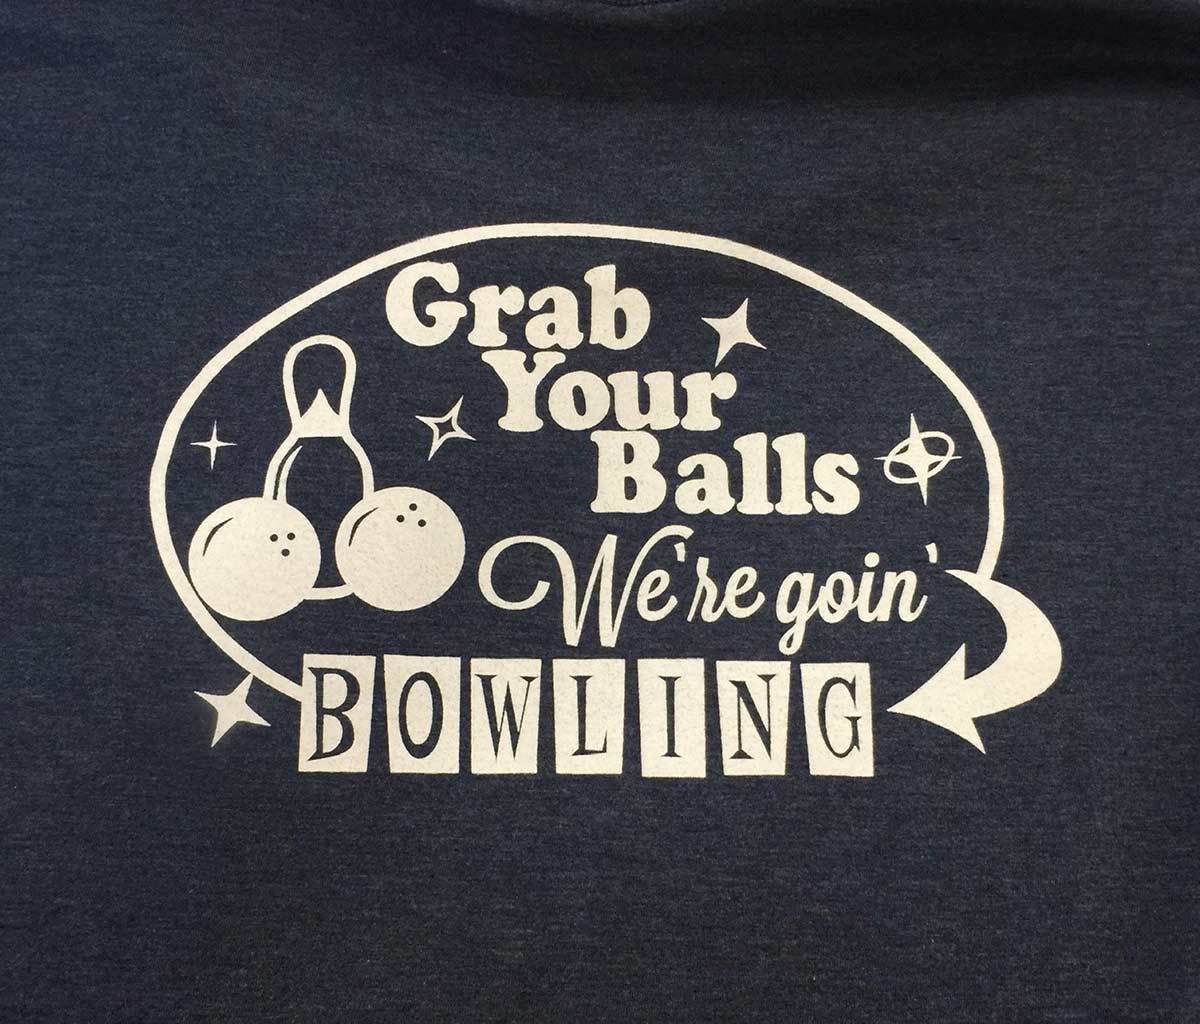 Custom printed shirts for Whitefish Bowling Alley